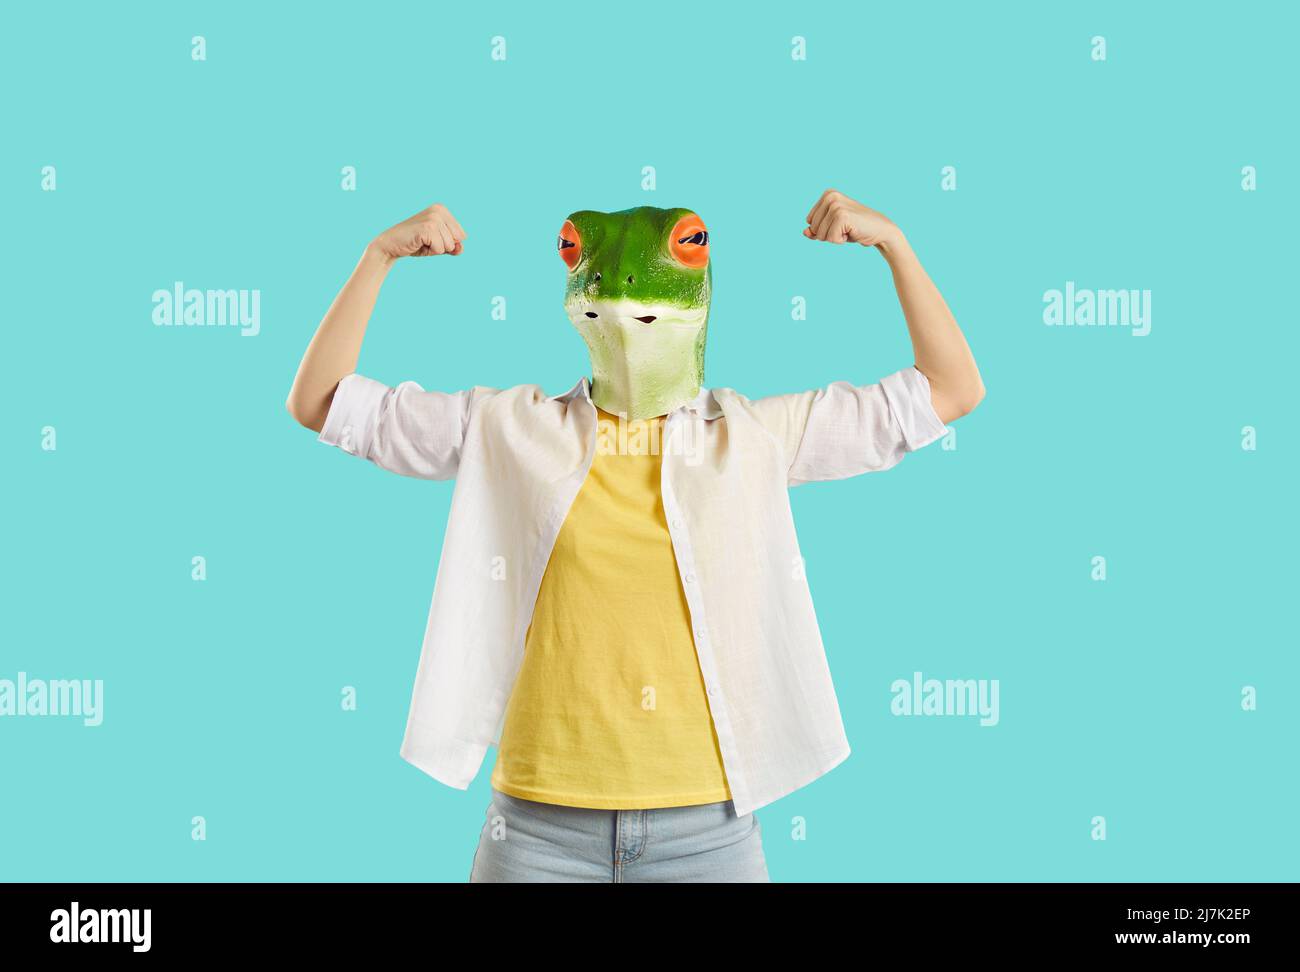 Young woman with funny frog head mask shows her strength isolated on bright light blue background. Stock Photo